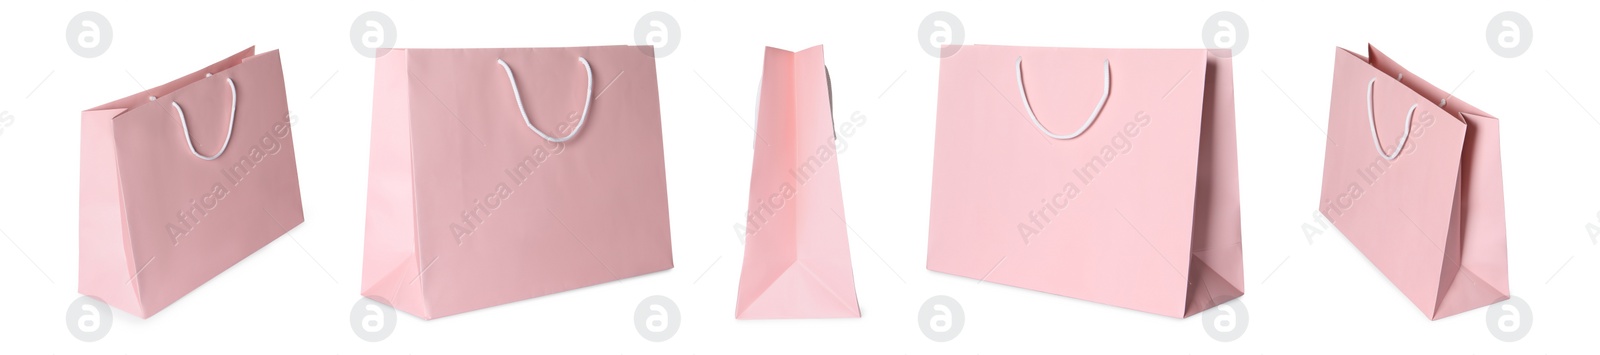 Image of Pink shopping bag isolated on white, different sides